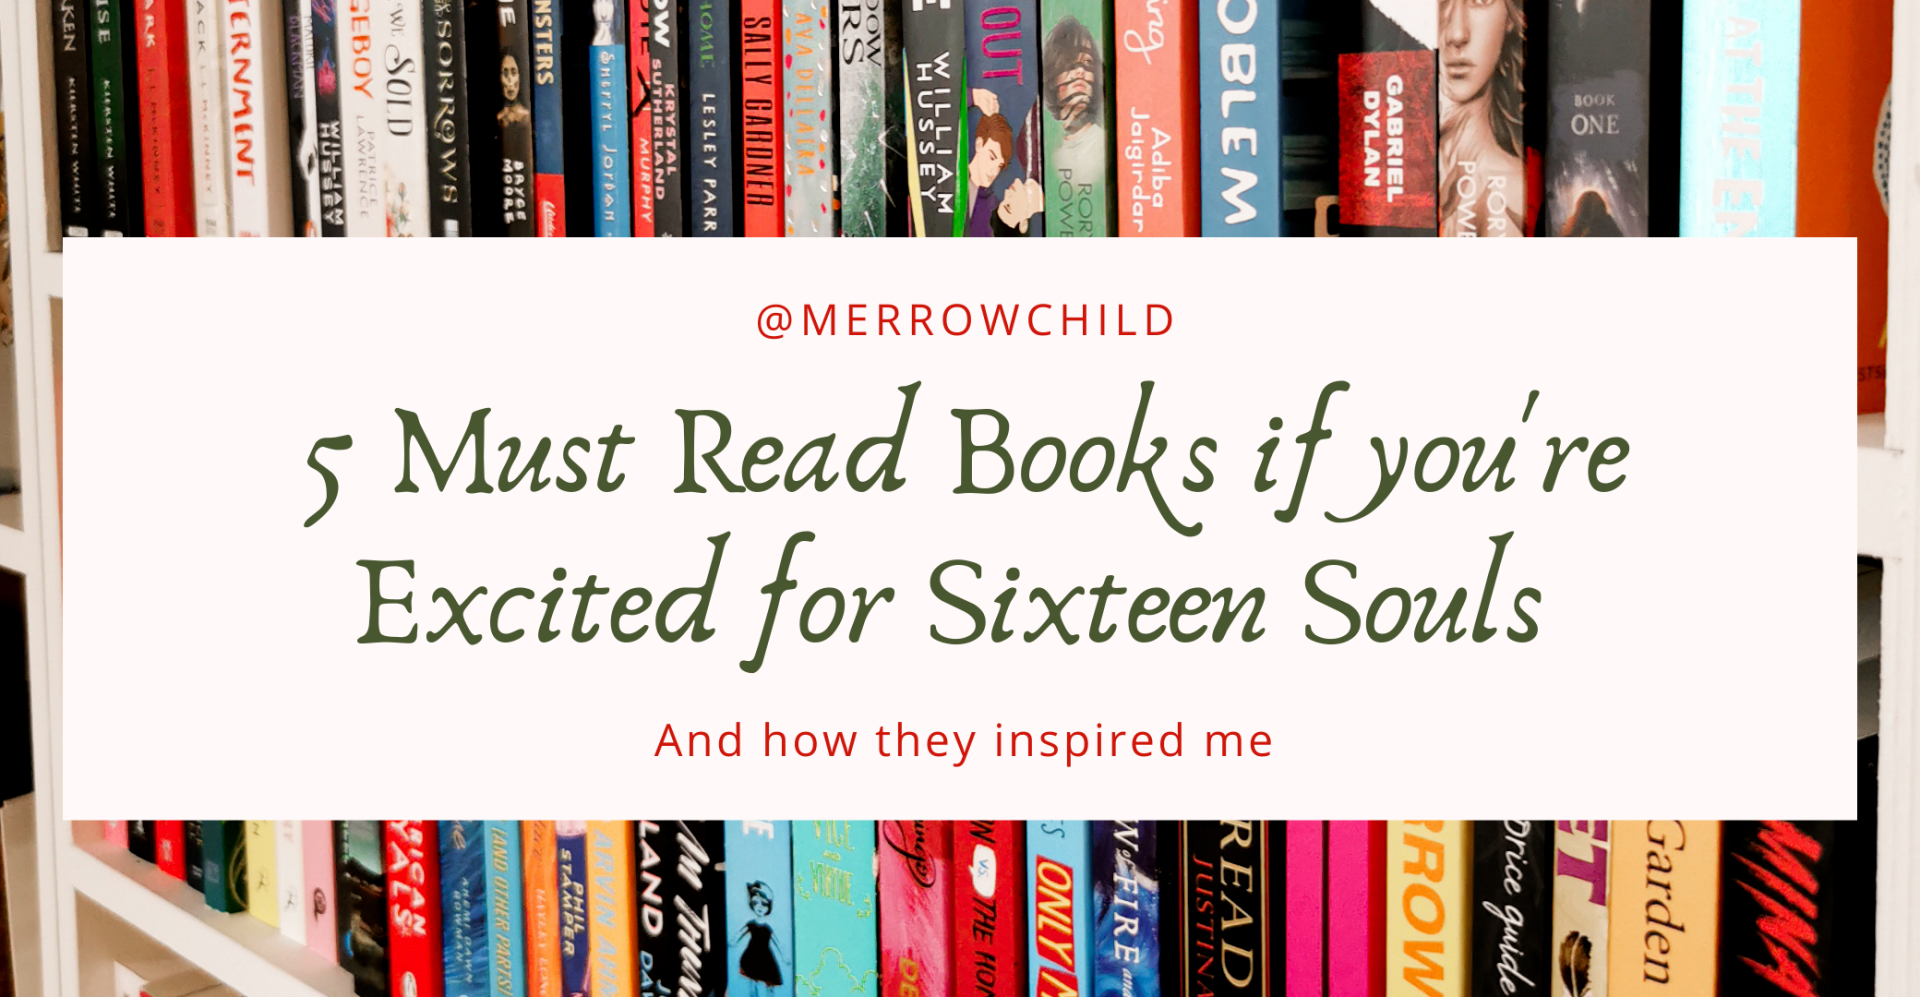 5 Must Read Books if You're Excited for Sixteen Souls